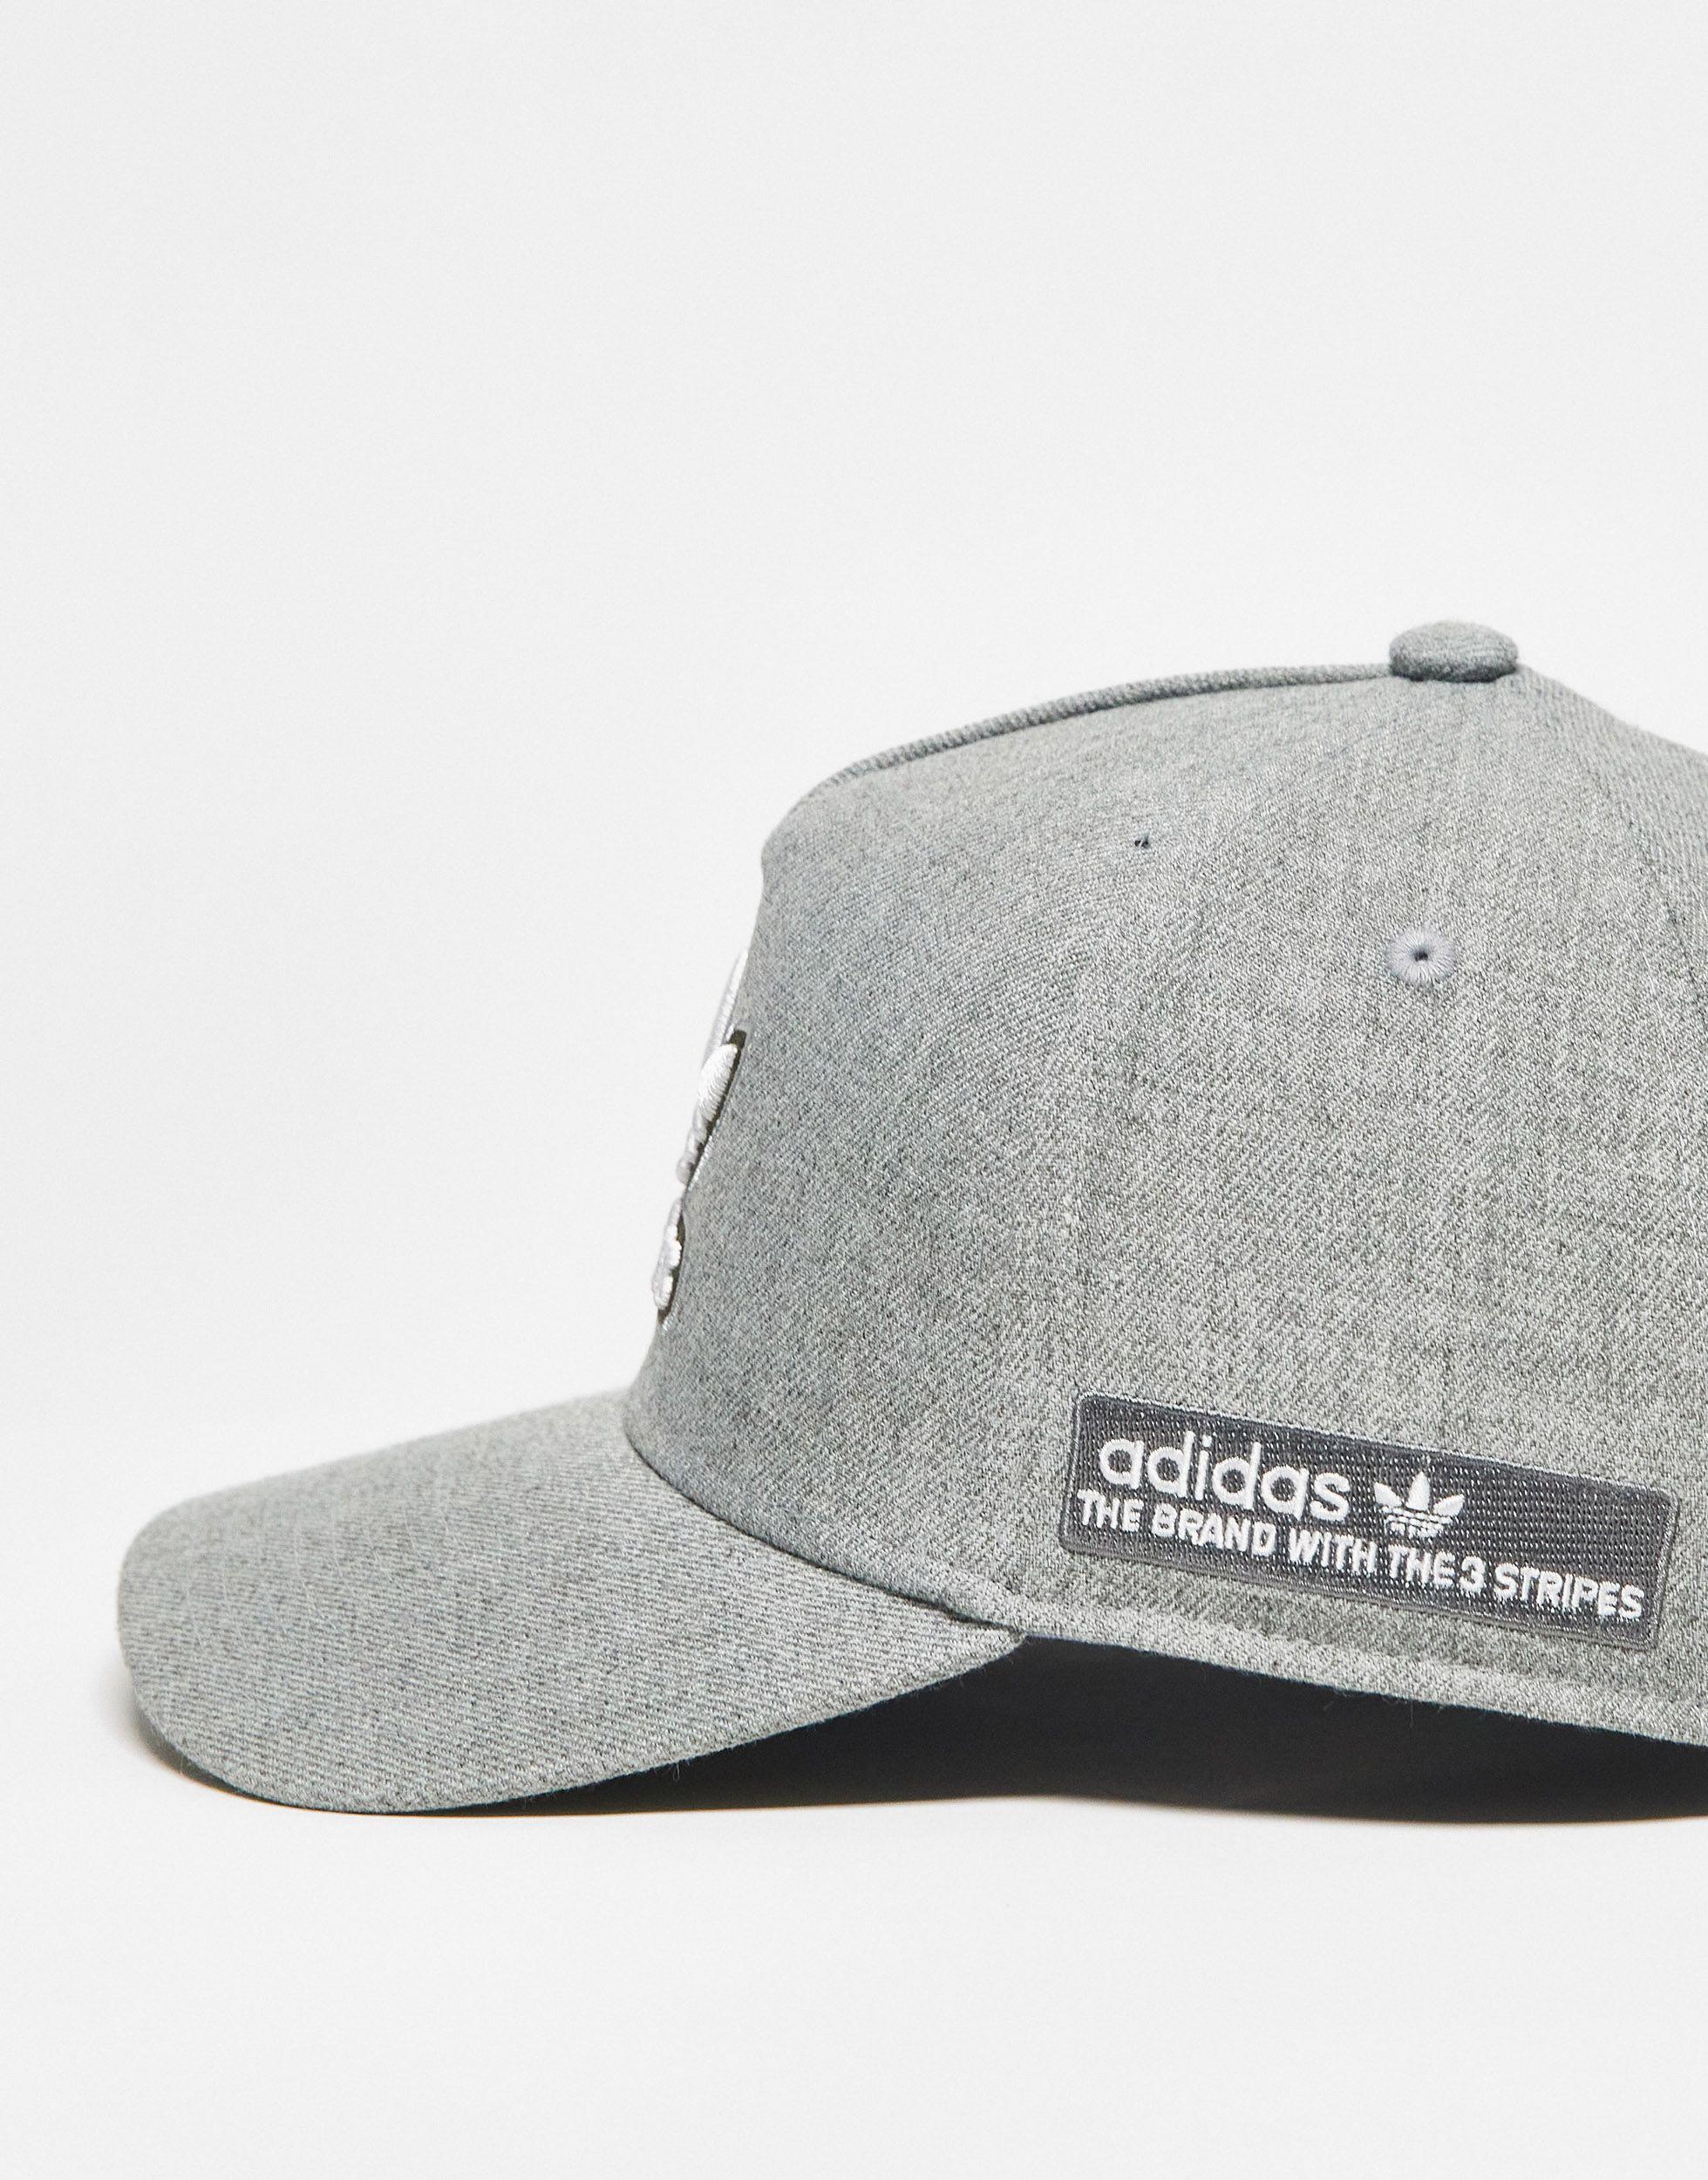 adidas Originals A-frame Snapback Hat in White | Lyst